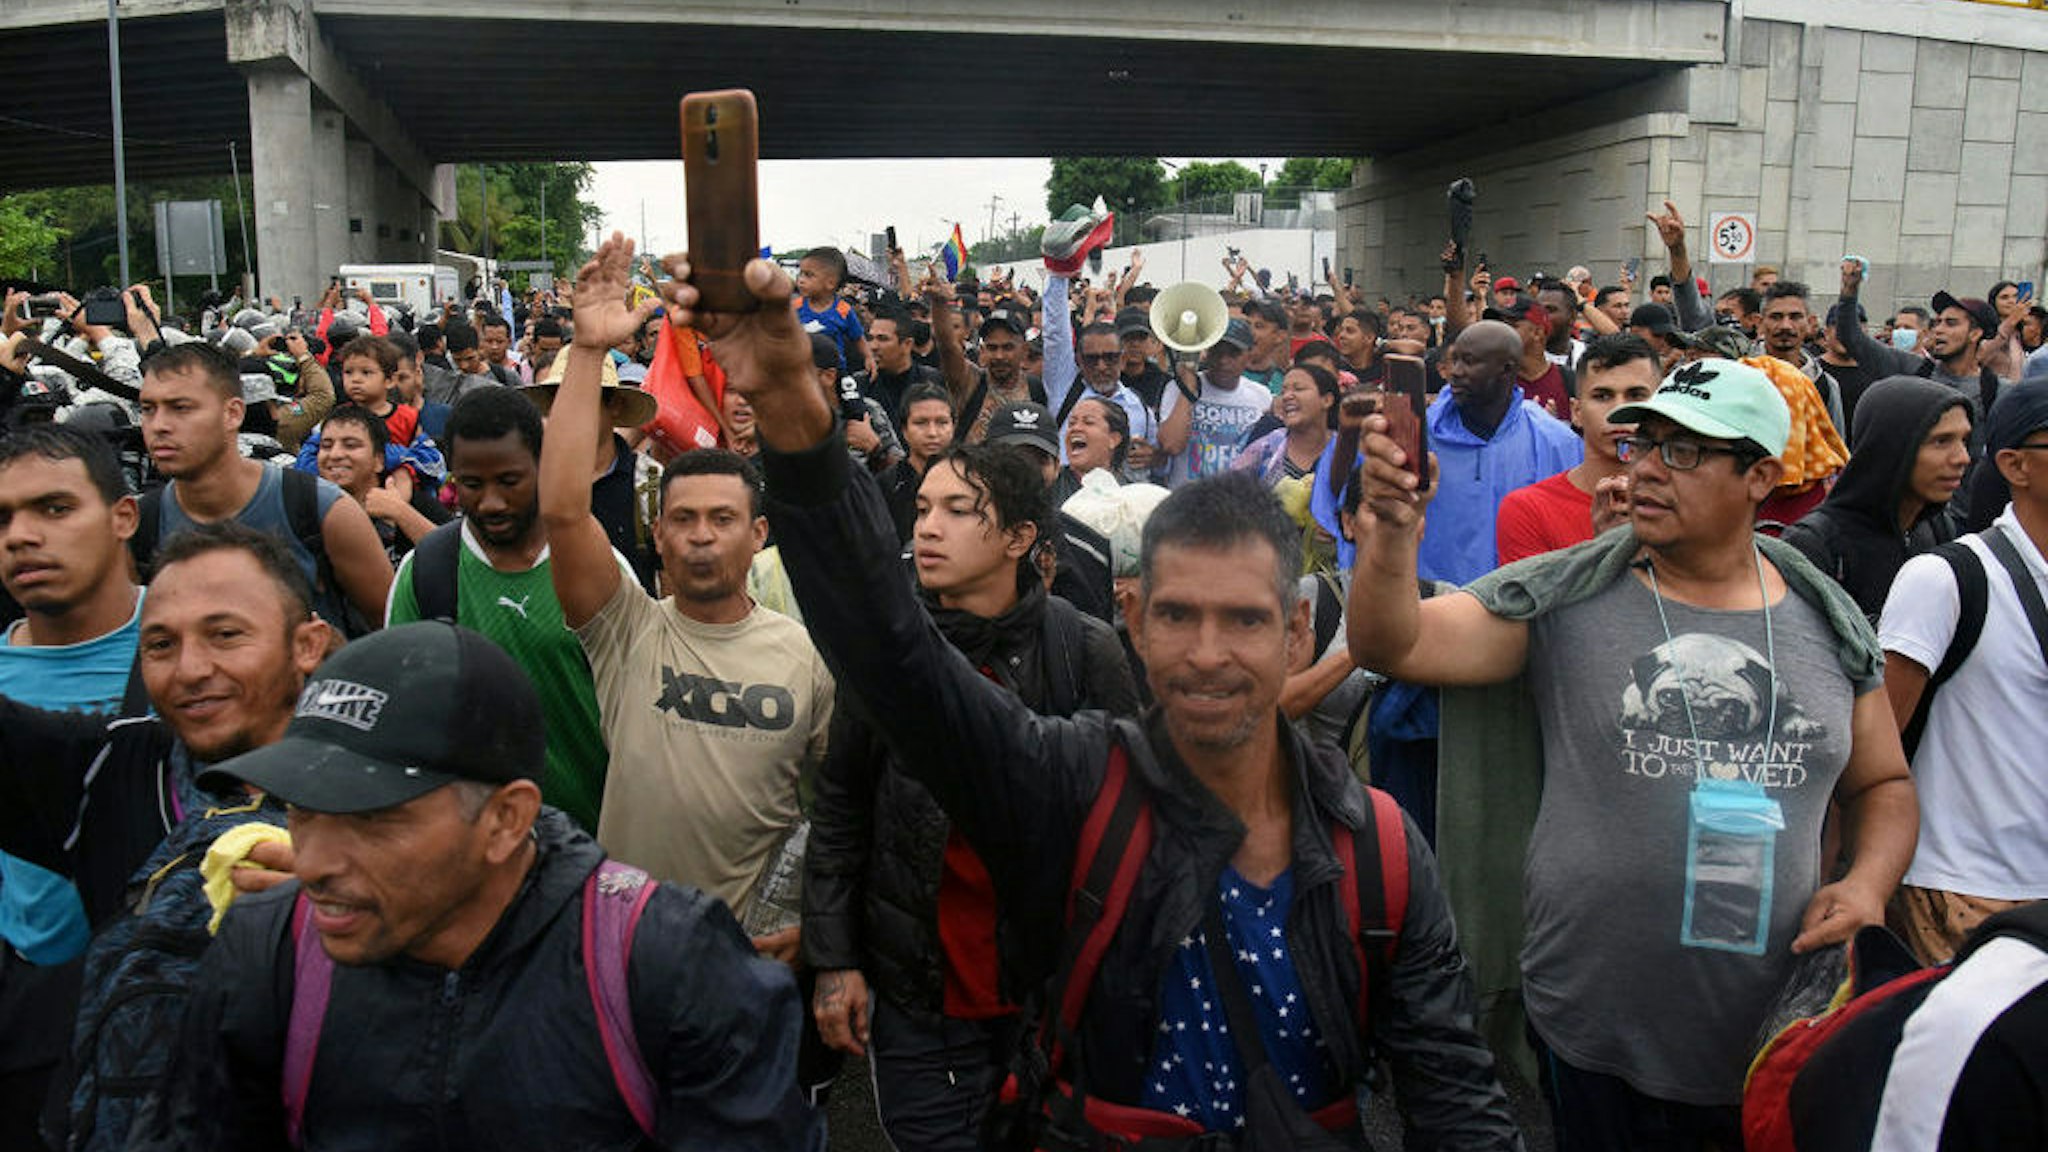 Migrants from Central and South America take part in a caravan towards the border with the United States, in Tapachula, Chiapas state, Mexico, on June 6, 2022. (Photo by ISAAC GUZMAN / AFP) (Photo by ISAAC GUZMAN/AFP via Getty Images)